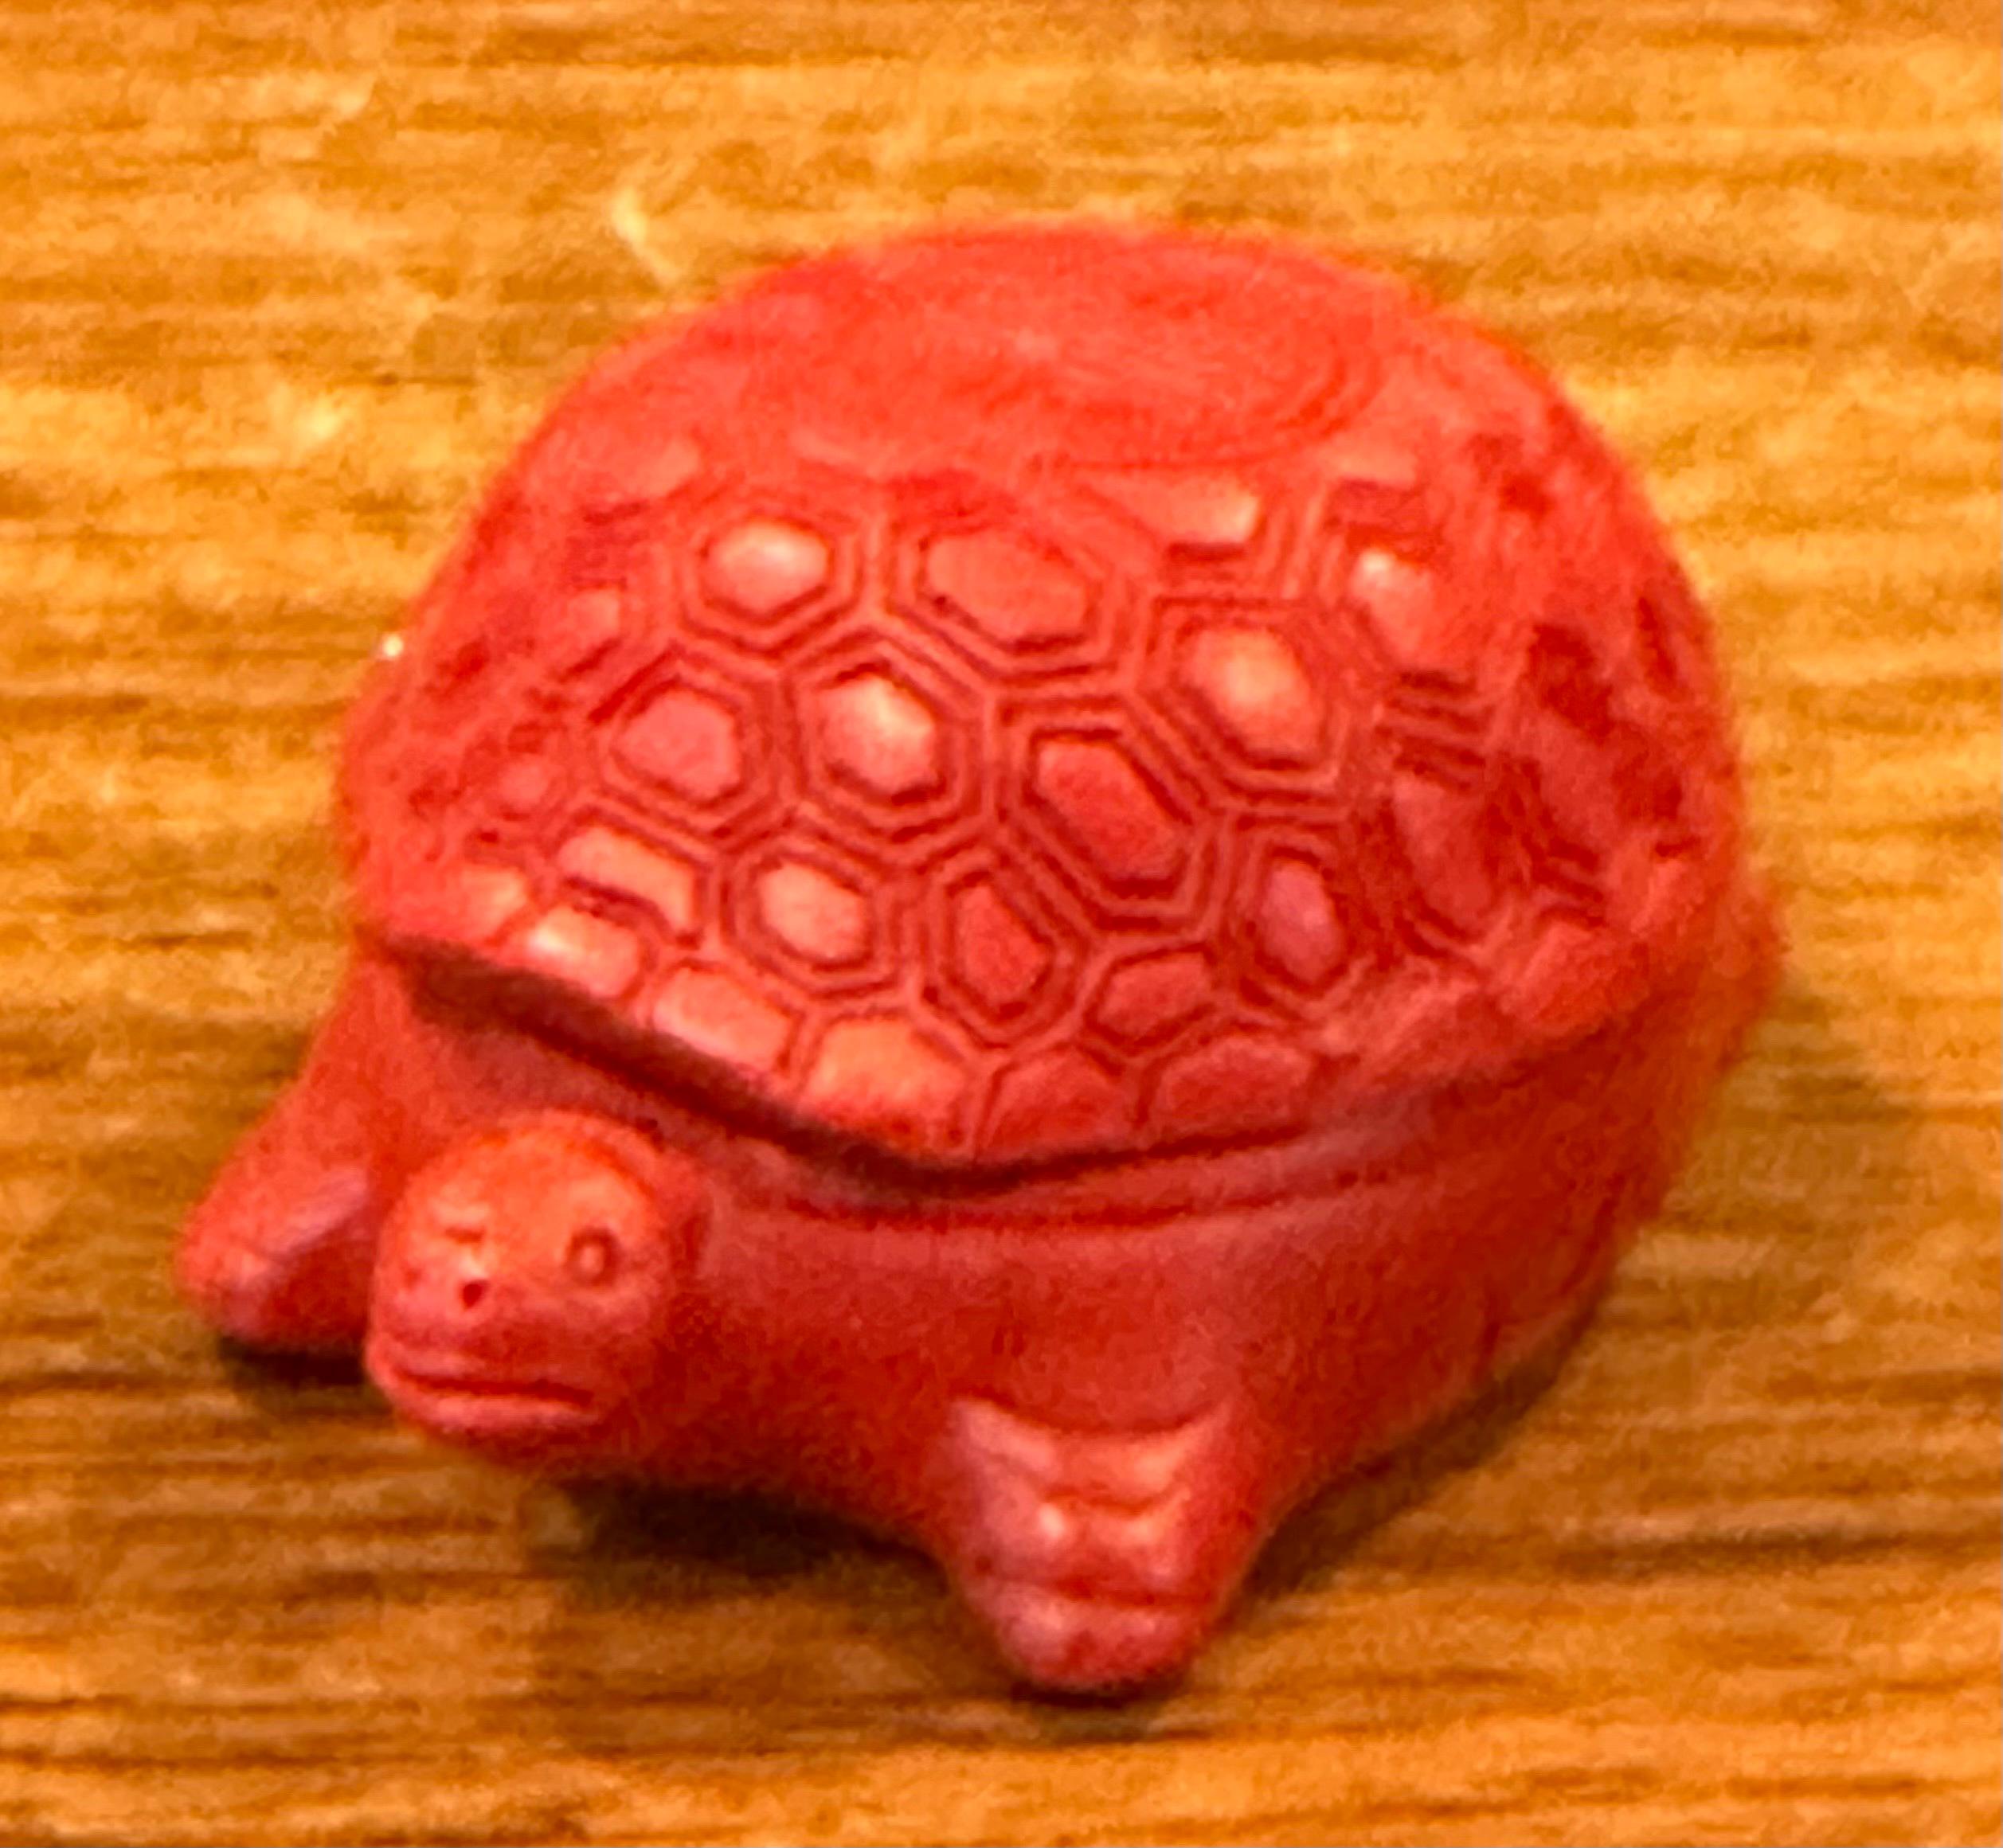 A petite Chinese cinnabar lacquered turtle box, circa 1980's. The box is in very good vintage condition and measures 3.5